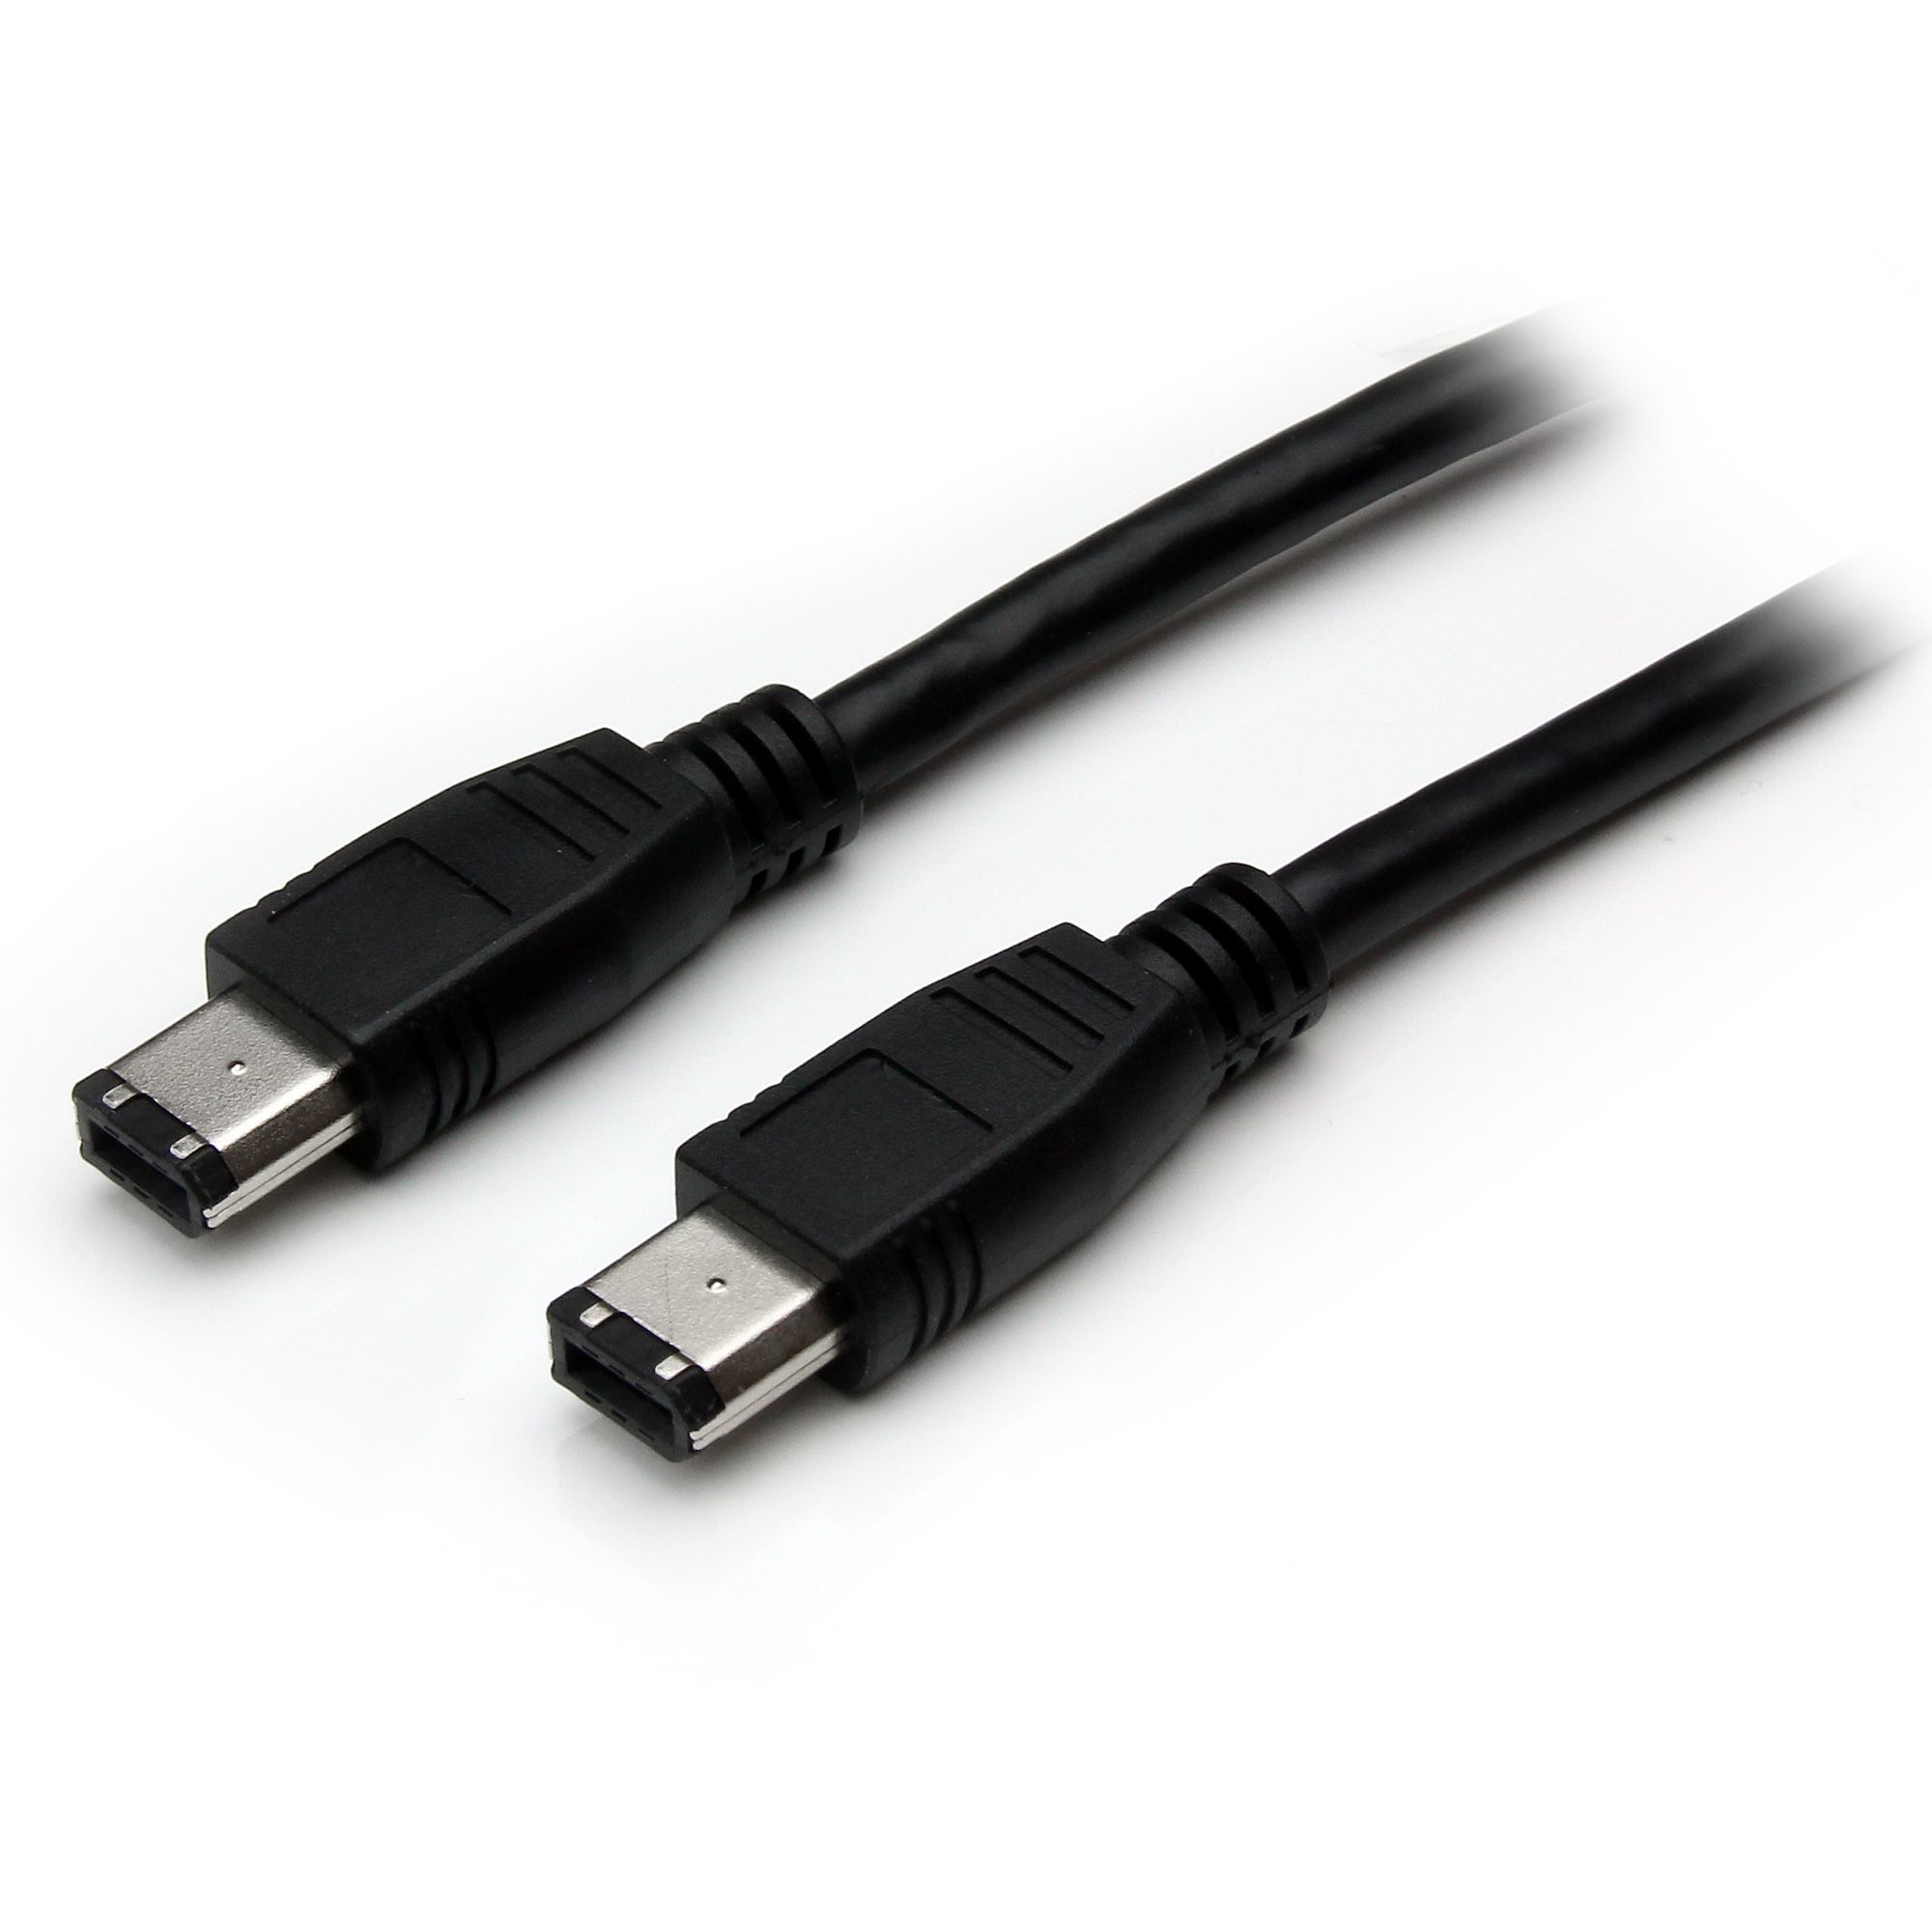 CABLE HAMA FIREWIRE IEEE 1394 6PIN/6PIN 2 MTS